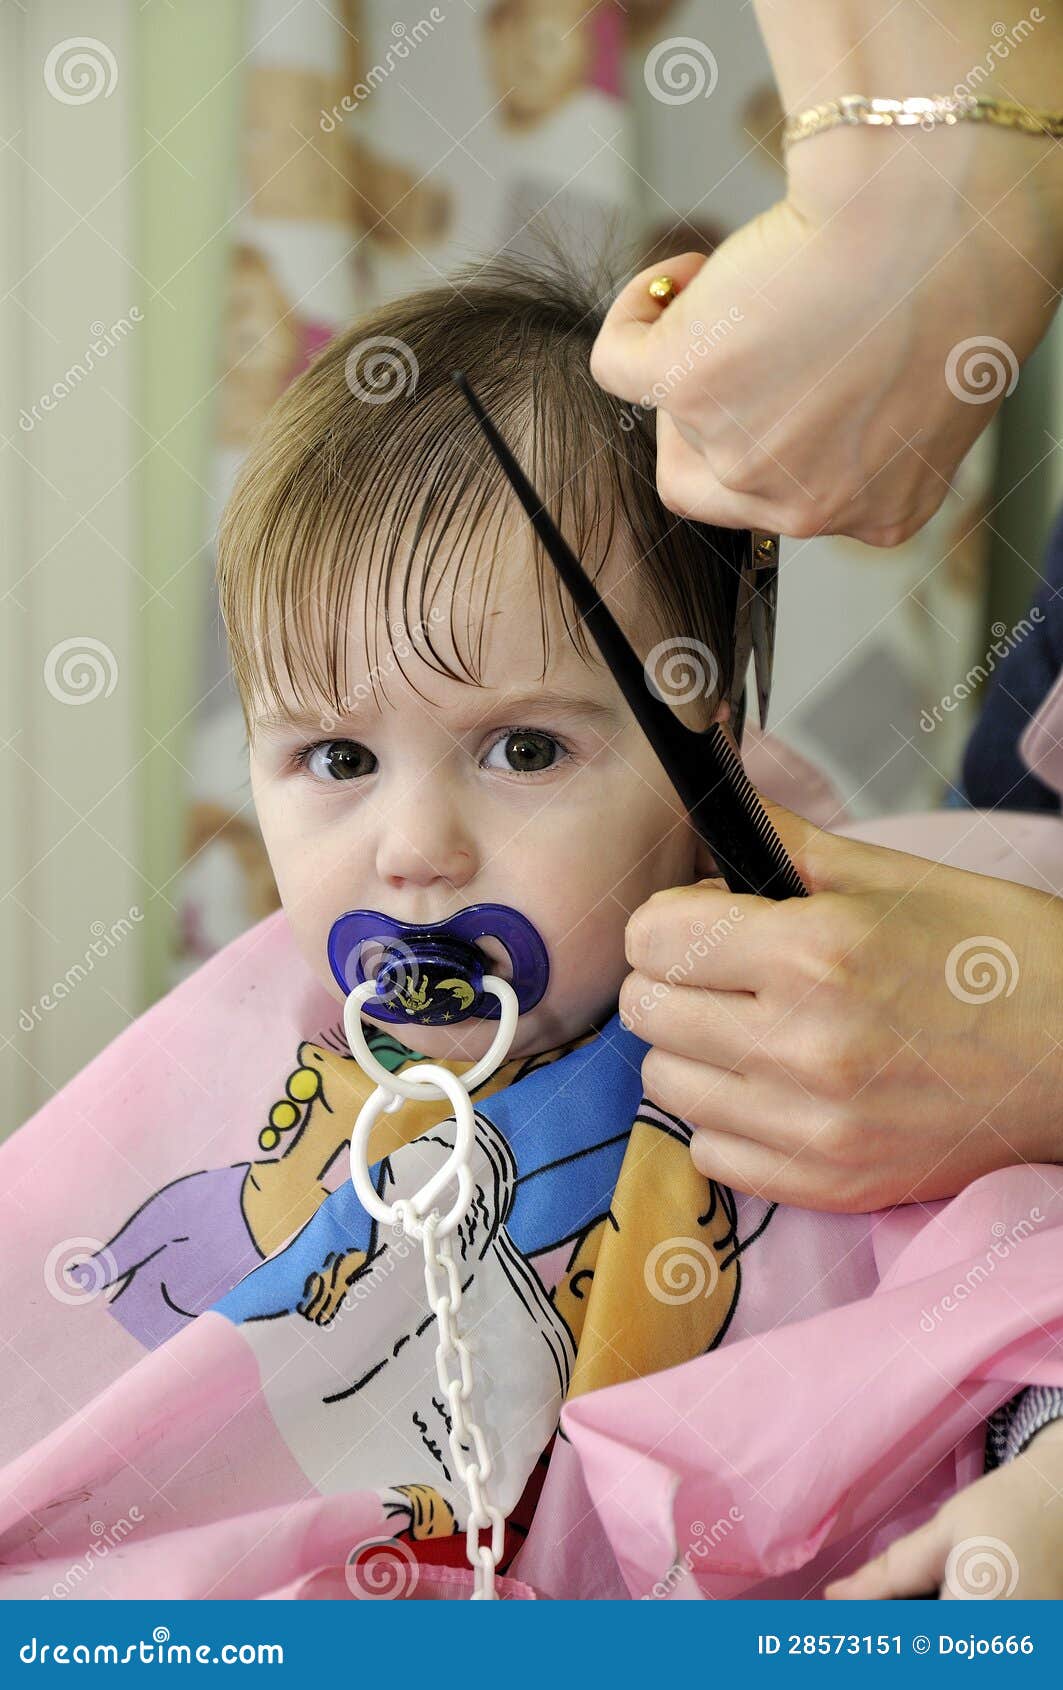 Hairstyle Of The One Year Old Child First Time Stock Image Image